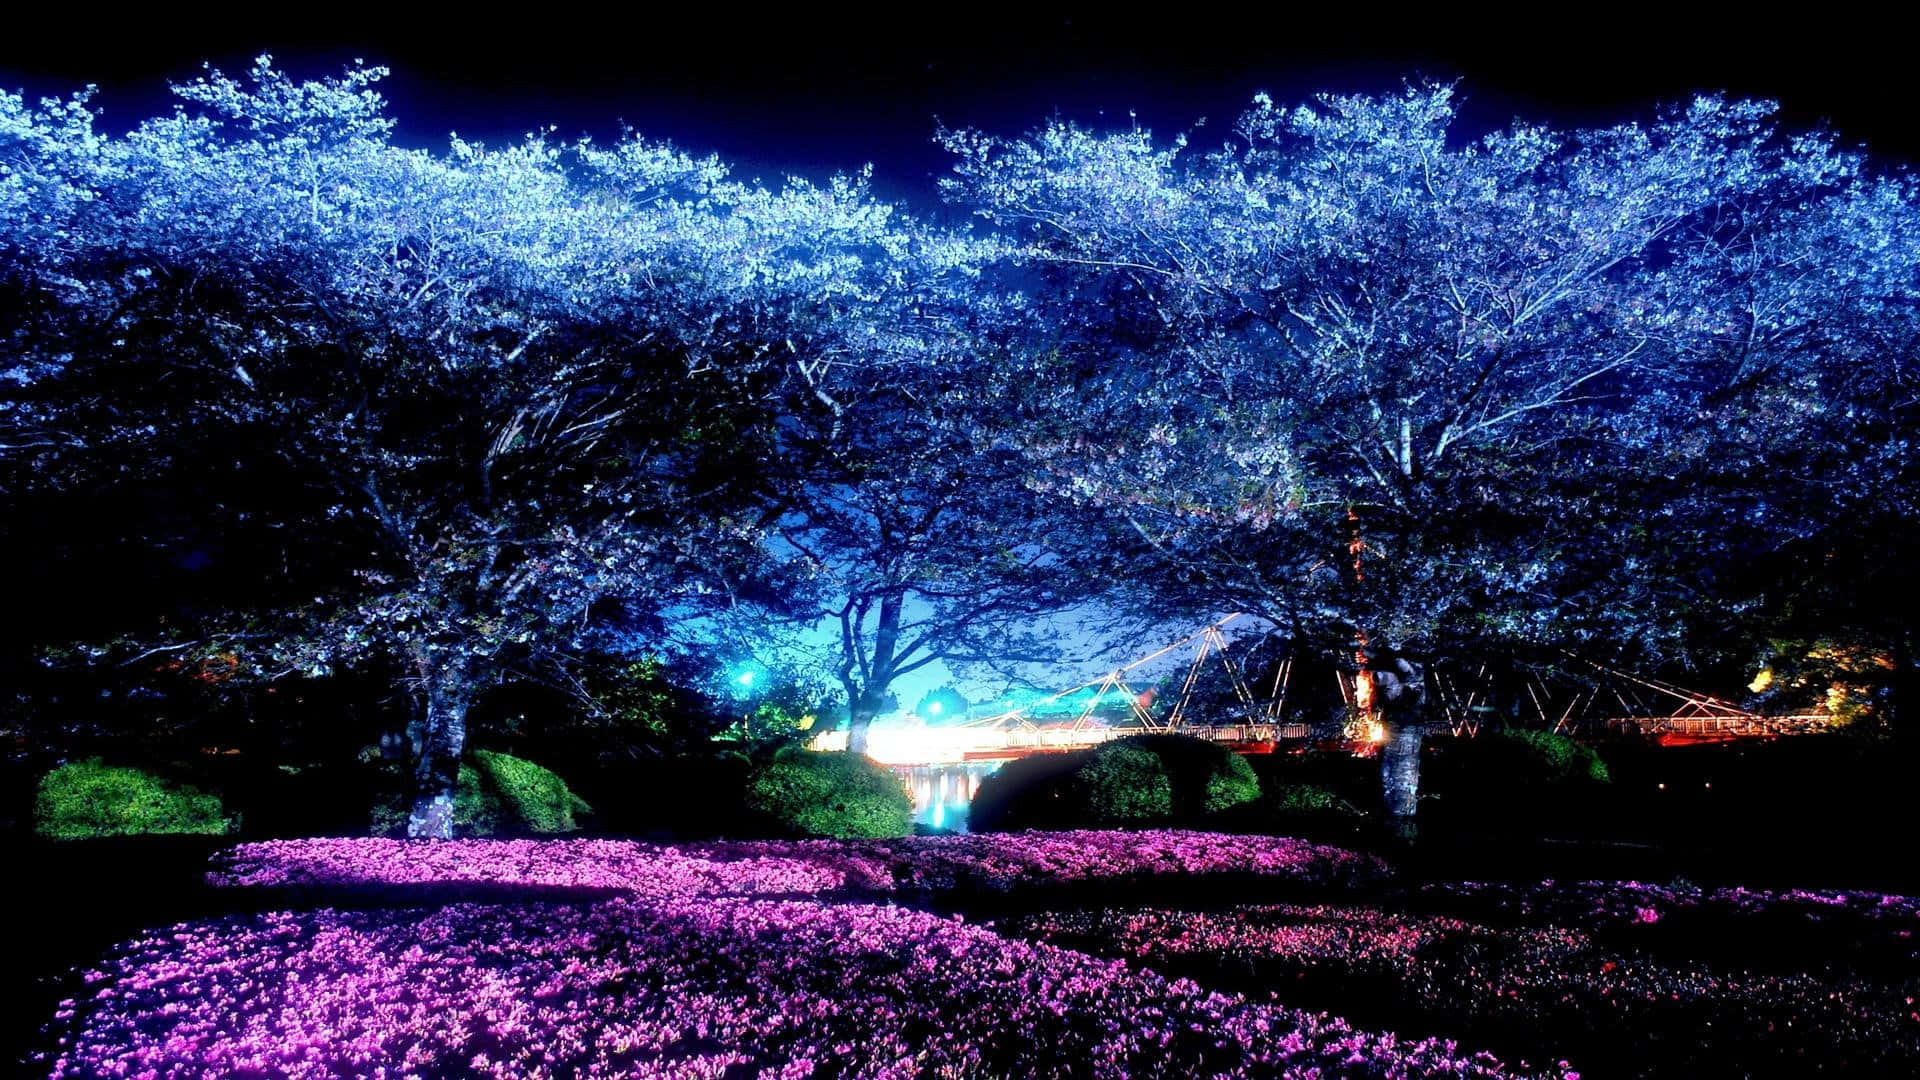 "Experience the beauty of nature at night with a beautiful cherry blossom tree" Wallpaper